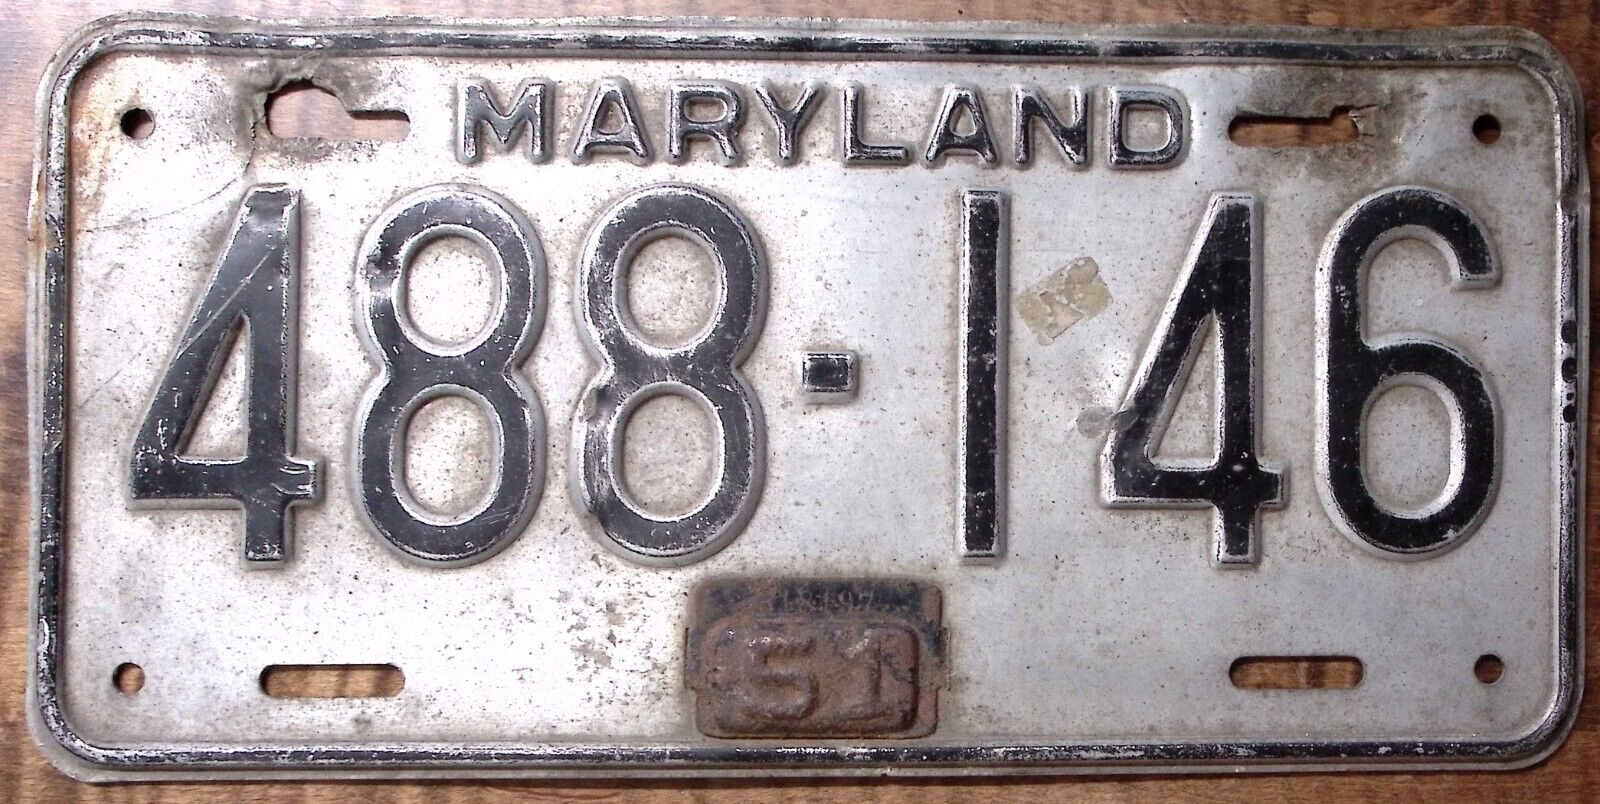 1951 VINTAGE MARYLAND AUTO LICENSE PLATE CAR TAG RUSTIC MAN CAVE DECOR Z5085